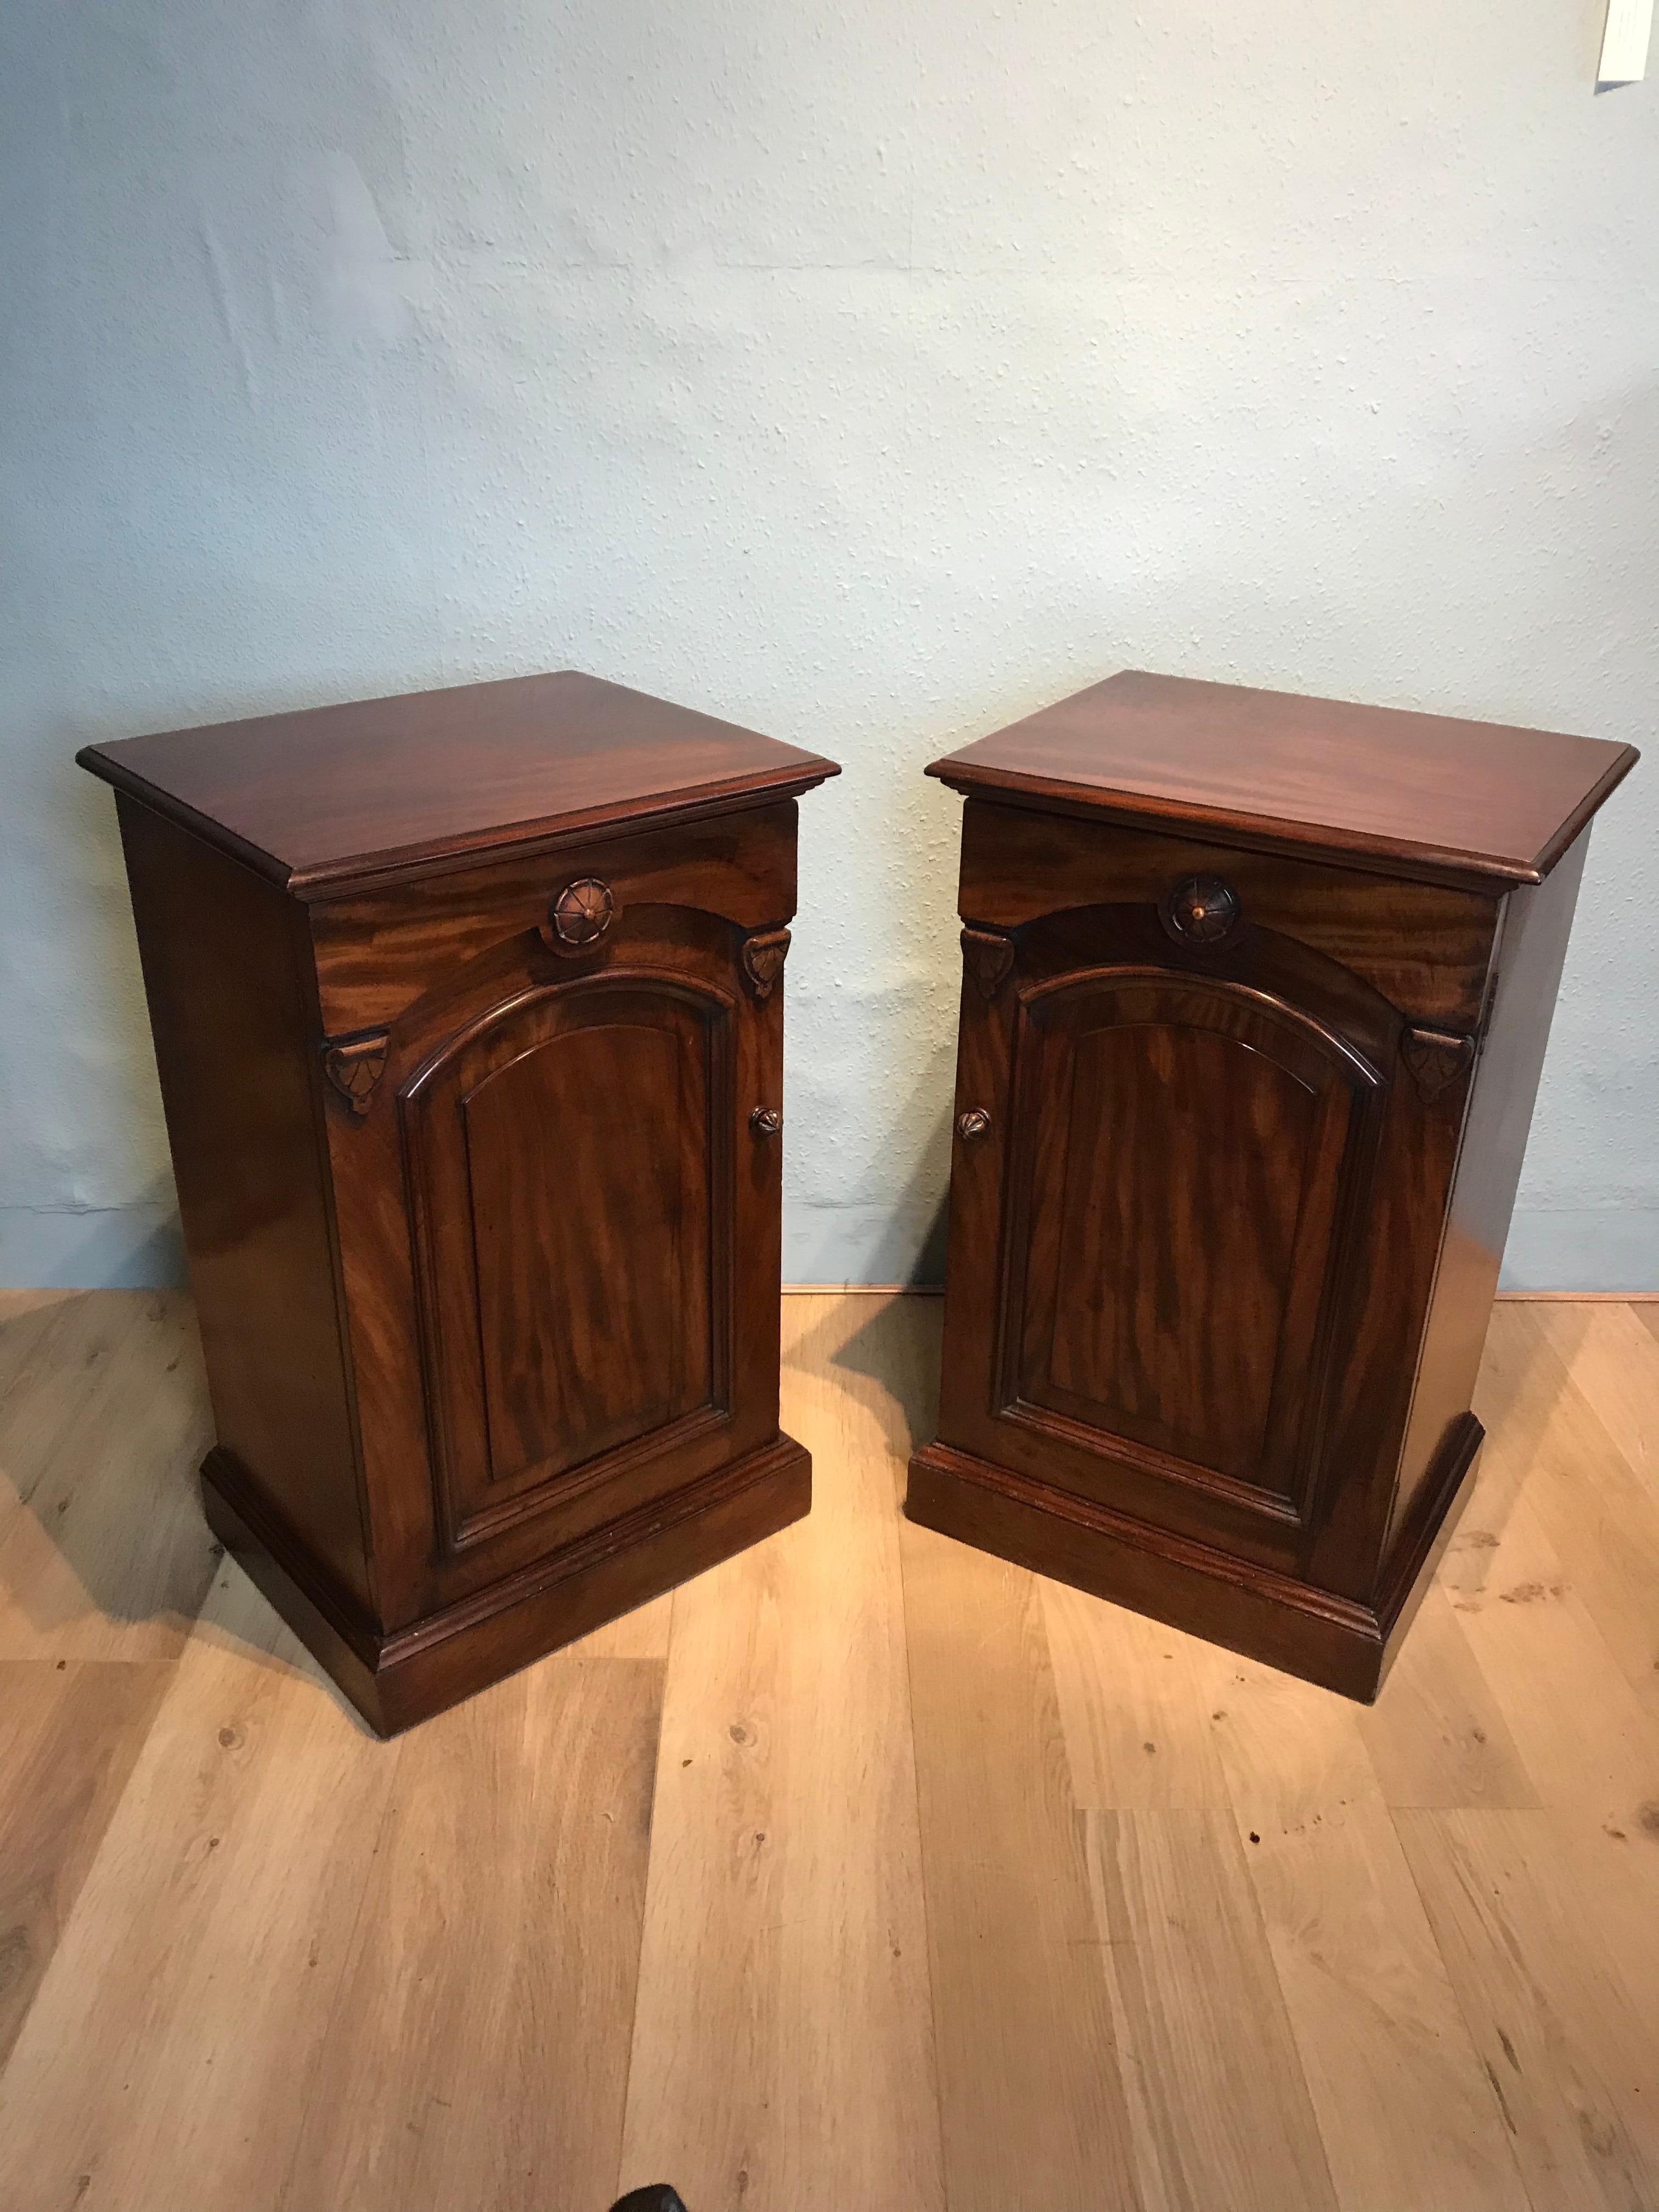 Pair of 19th Century mahogany pedestal cabinets with wonderful colour and figure, panelled door reveals two drawers and a middle shelf sitting on plinth base with panelled back, both cabinets are in very good condition.